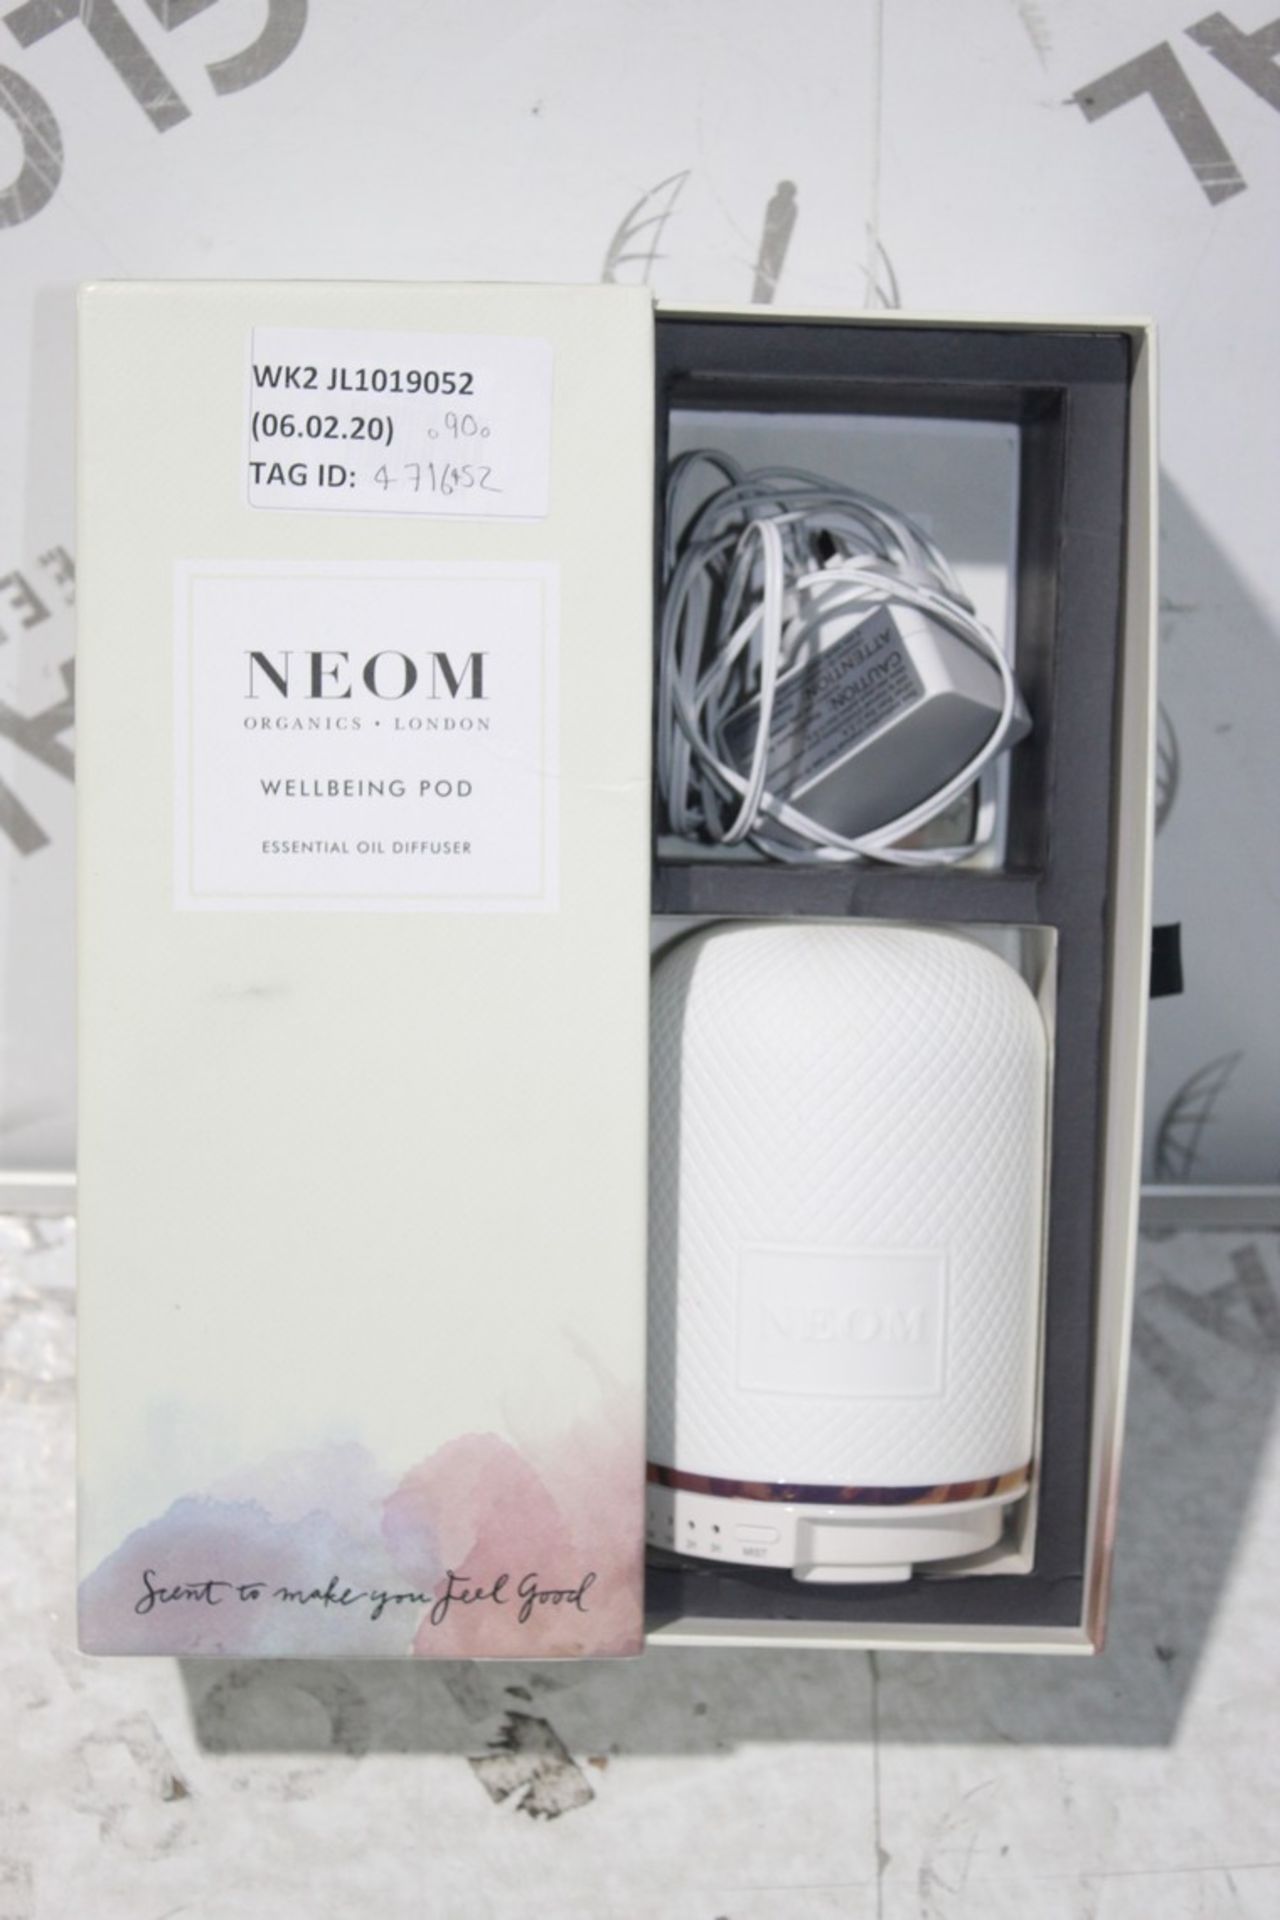 Boxed Neom Well Being Pod Essential Oil Diffuser RRP £90 (4716208) (Public Viewing and Appraisals